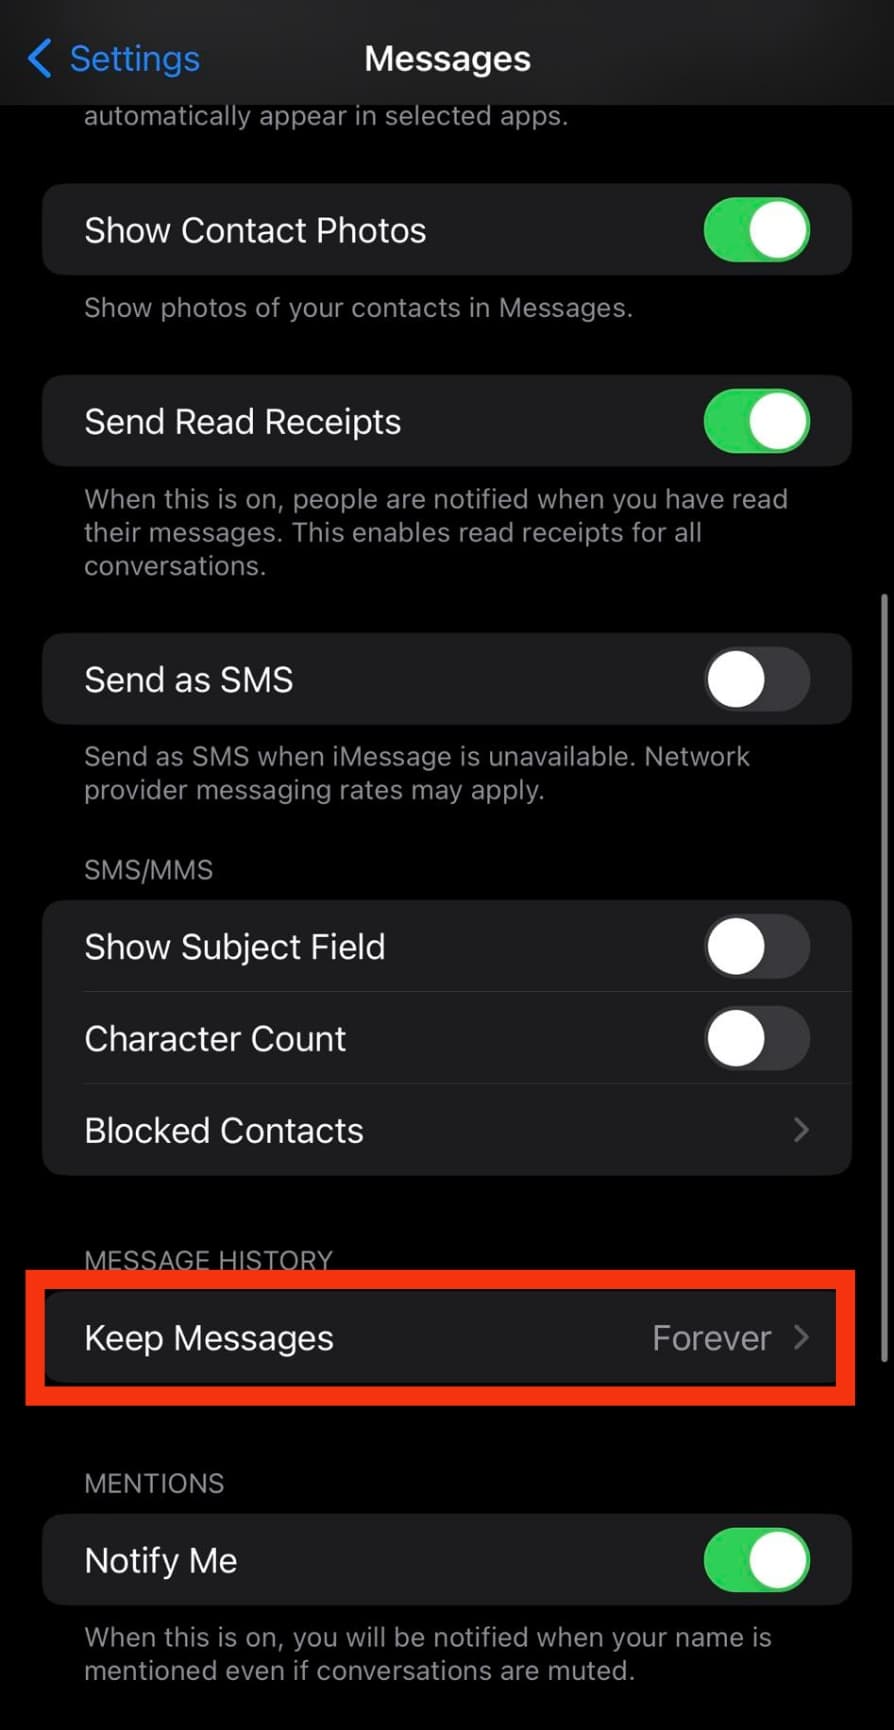 Tap On The Keep Messages Option